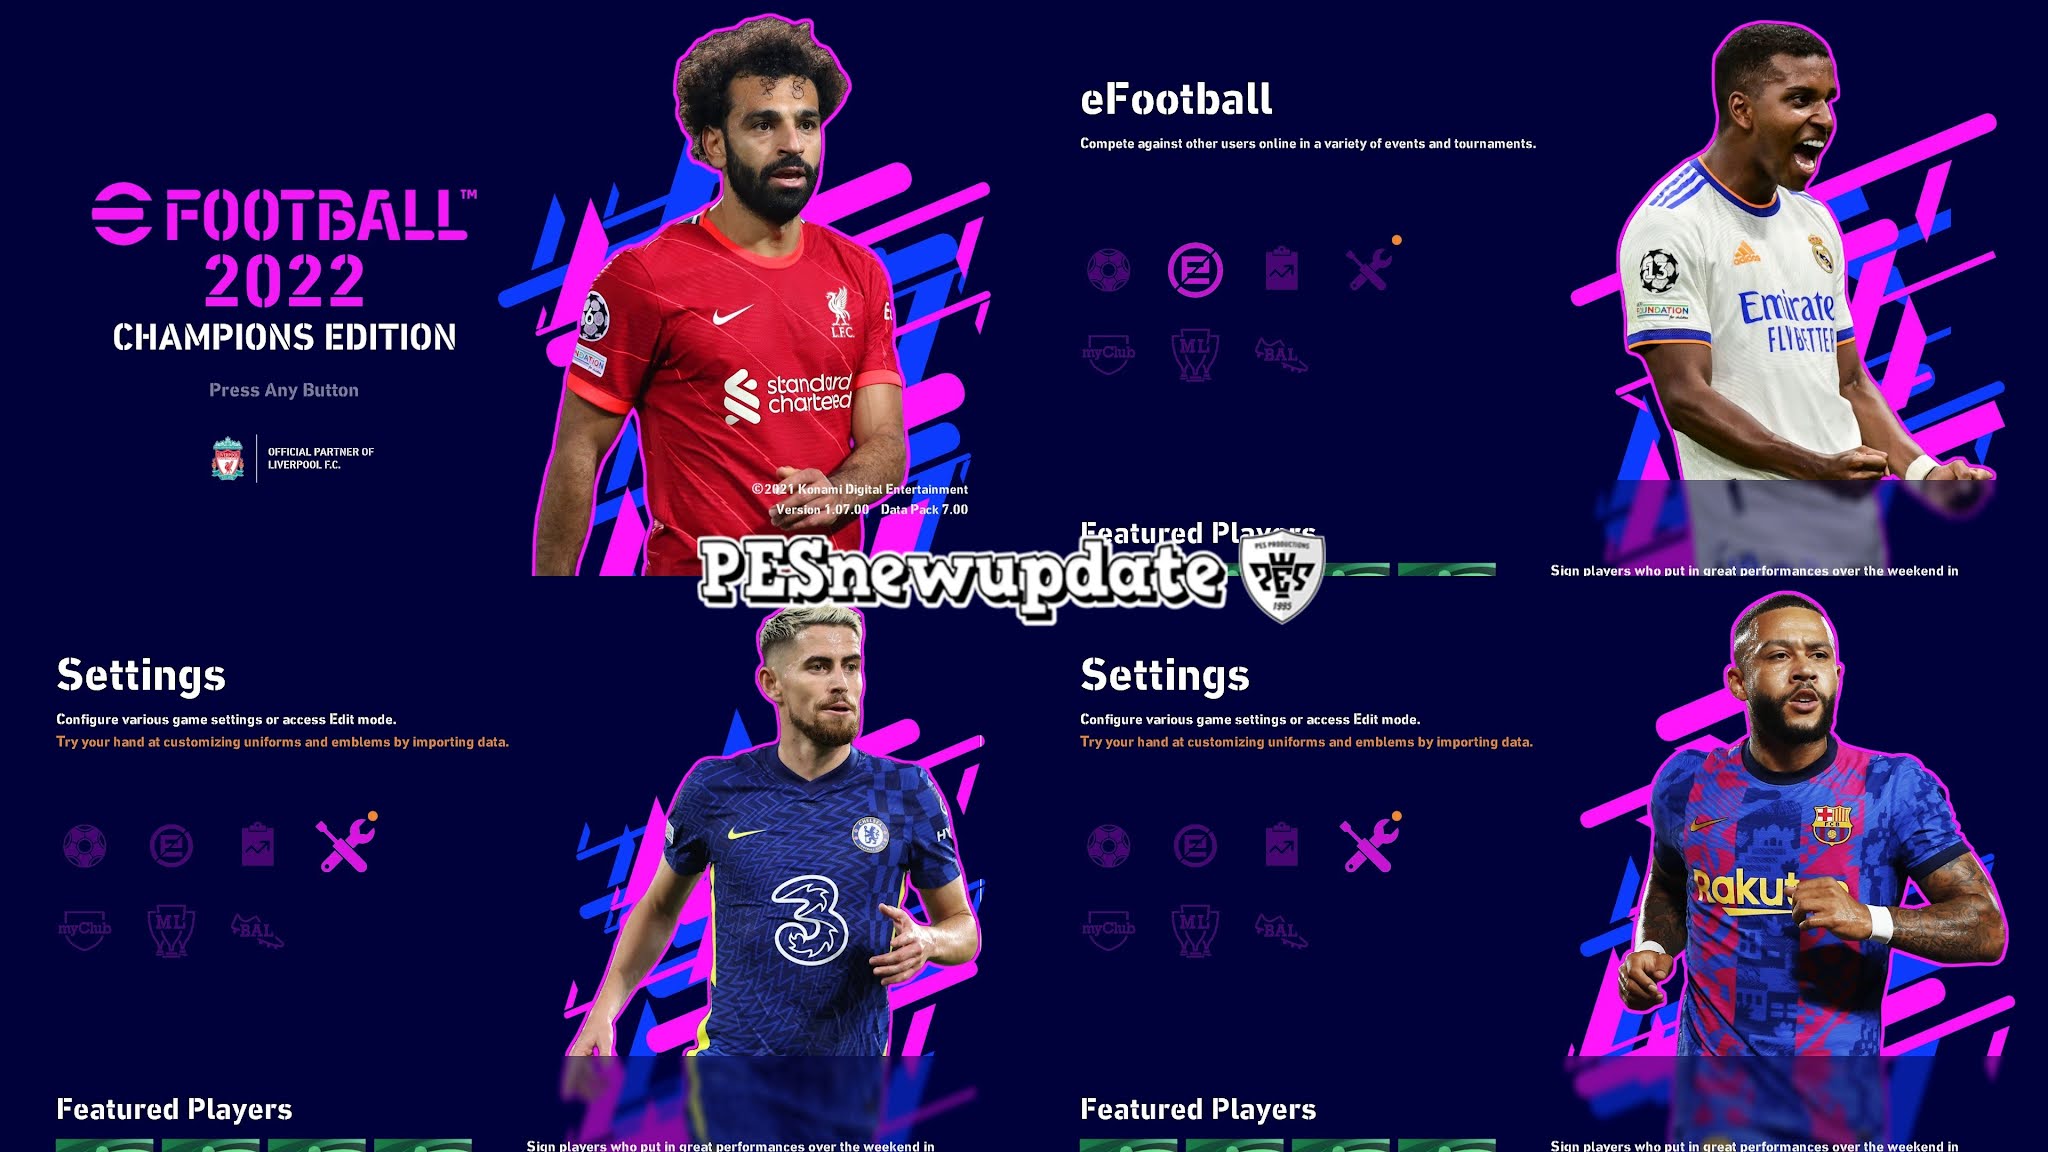 PES 2021 Menu Mod eFootball 2022 Champions Edition V2 by PESNewupdate ~ PESNewupdate Free Download Latest Pro Evolution Soccer Patch and Updates